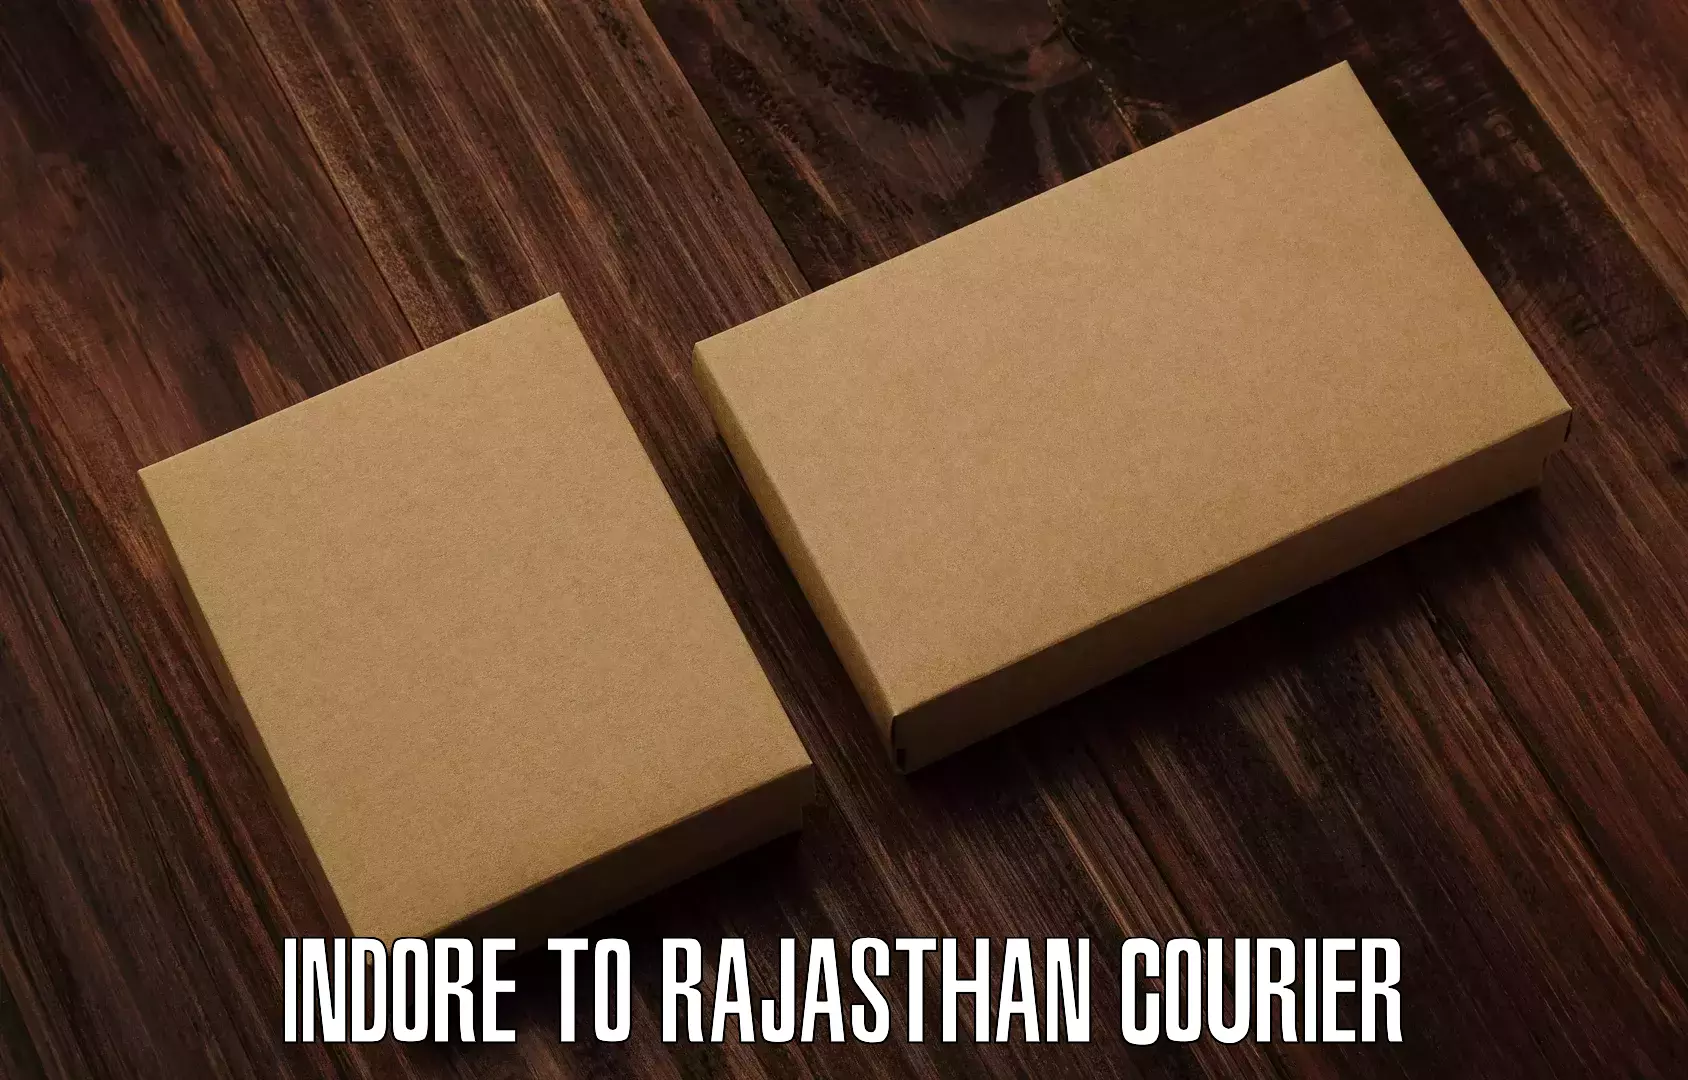 Courier service comparison in Indore to Rajasthan